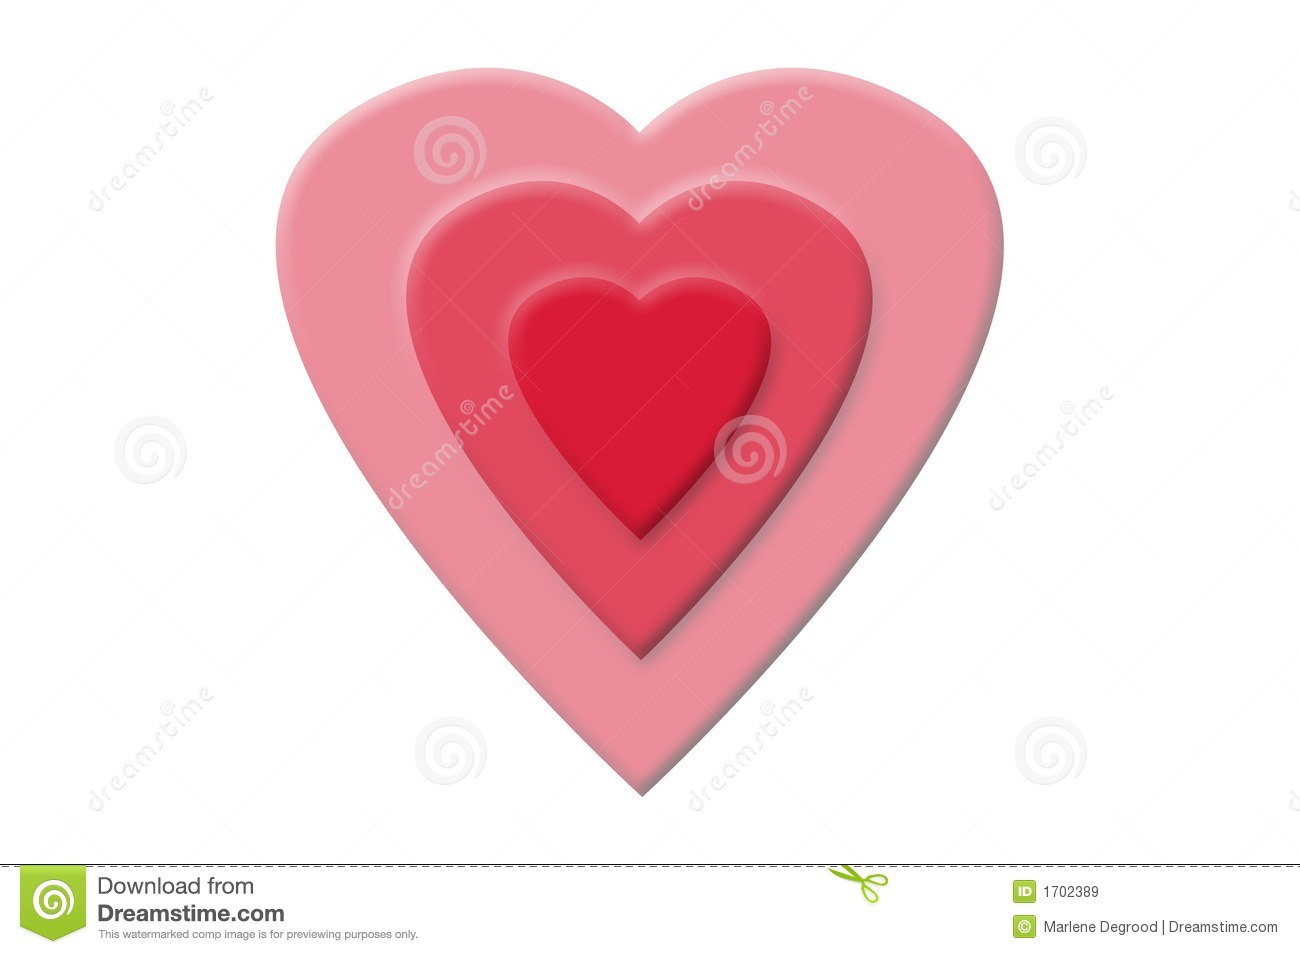 Triple Love Heart Royalty Free Stock Images   Image  1702389